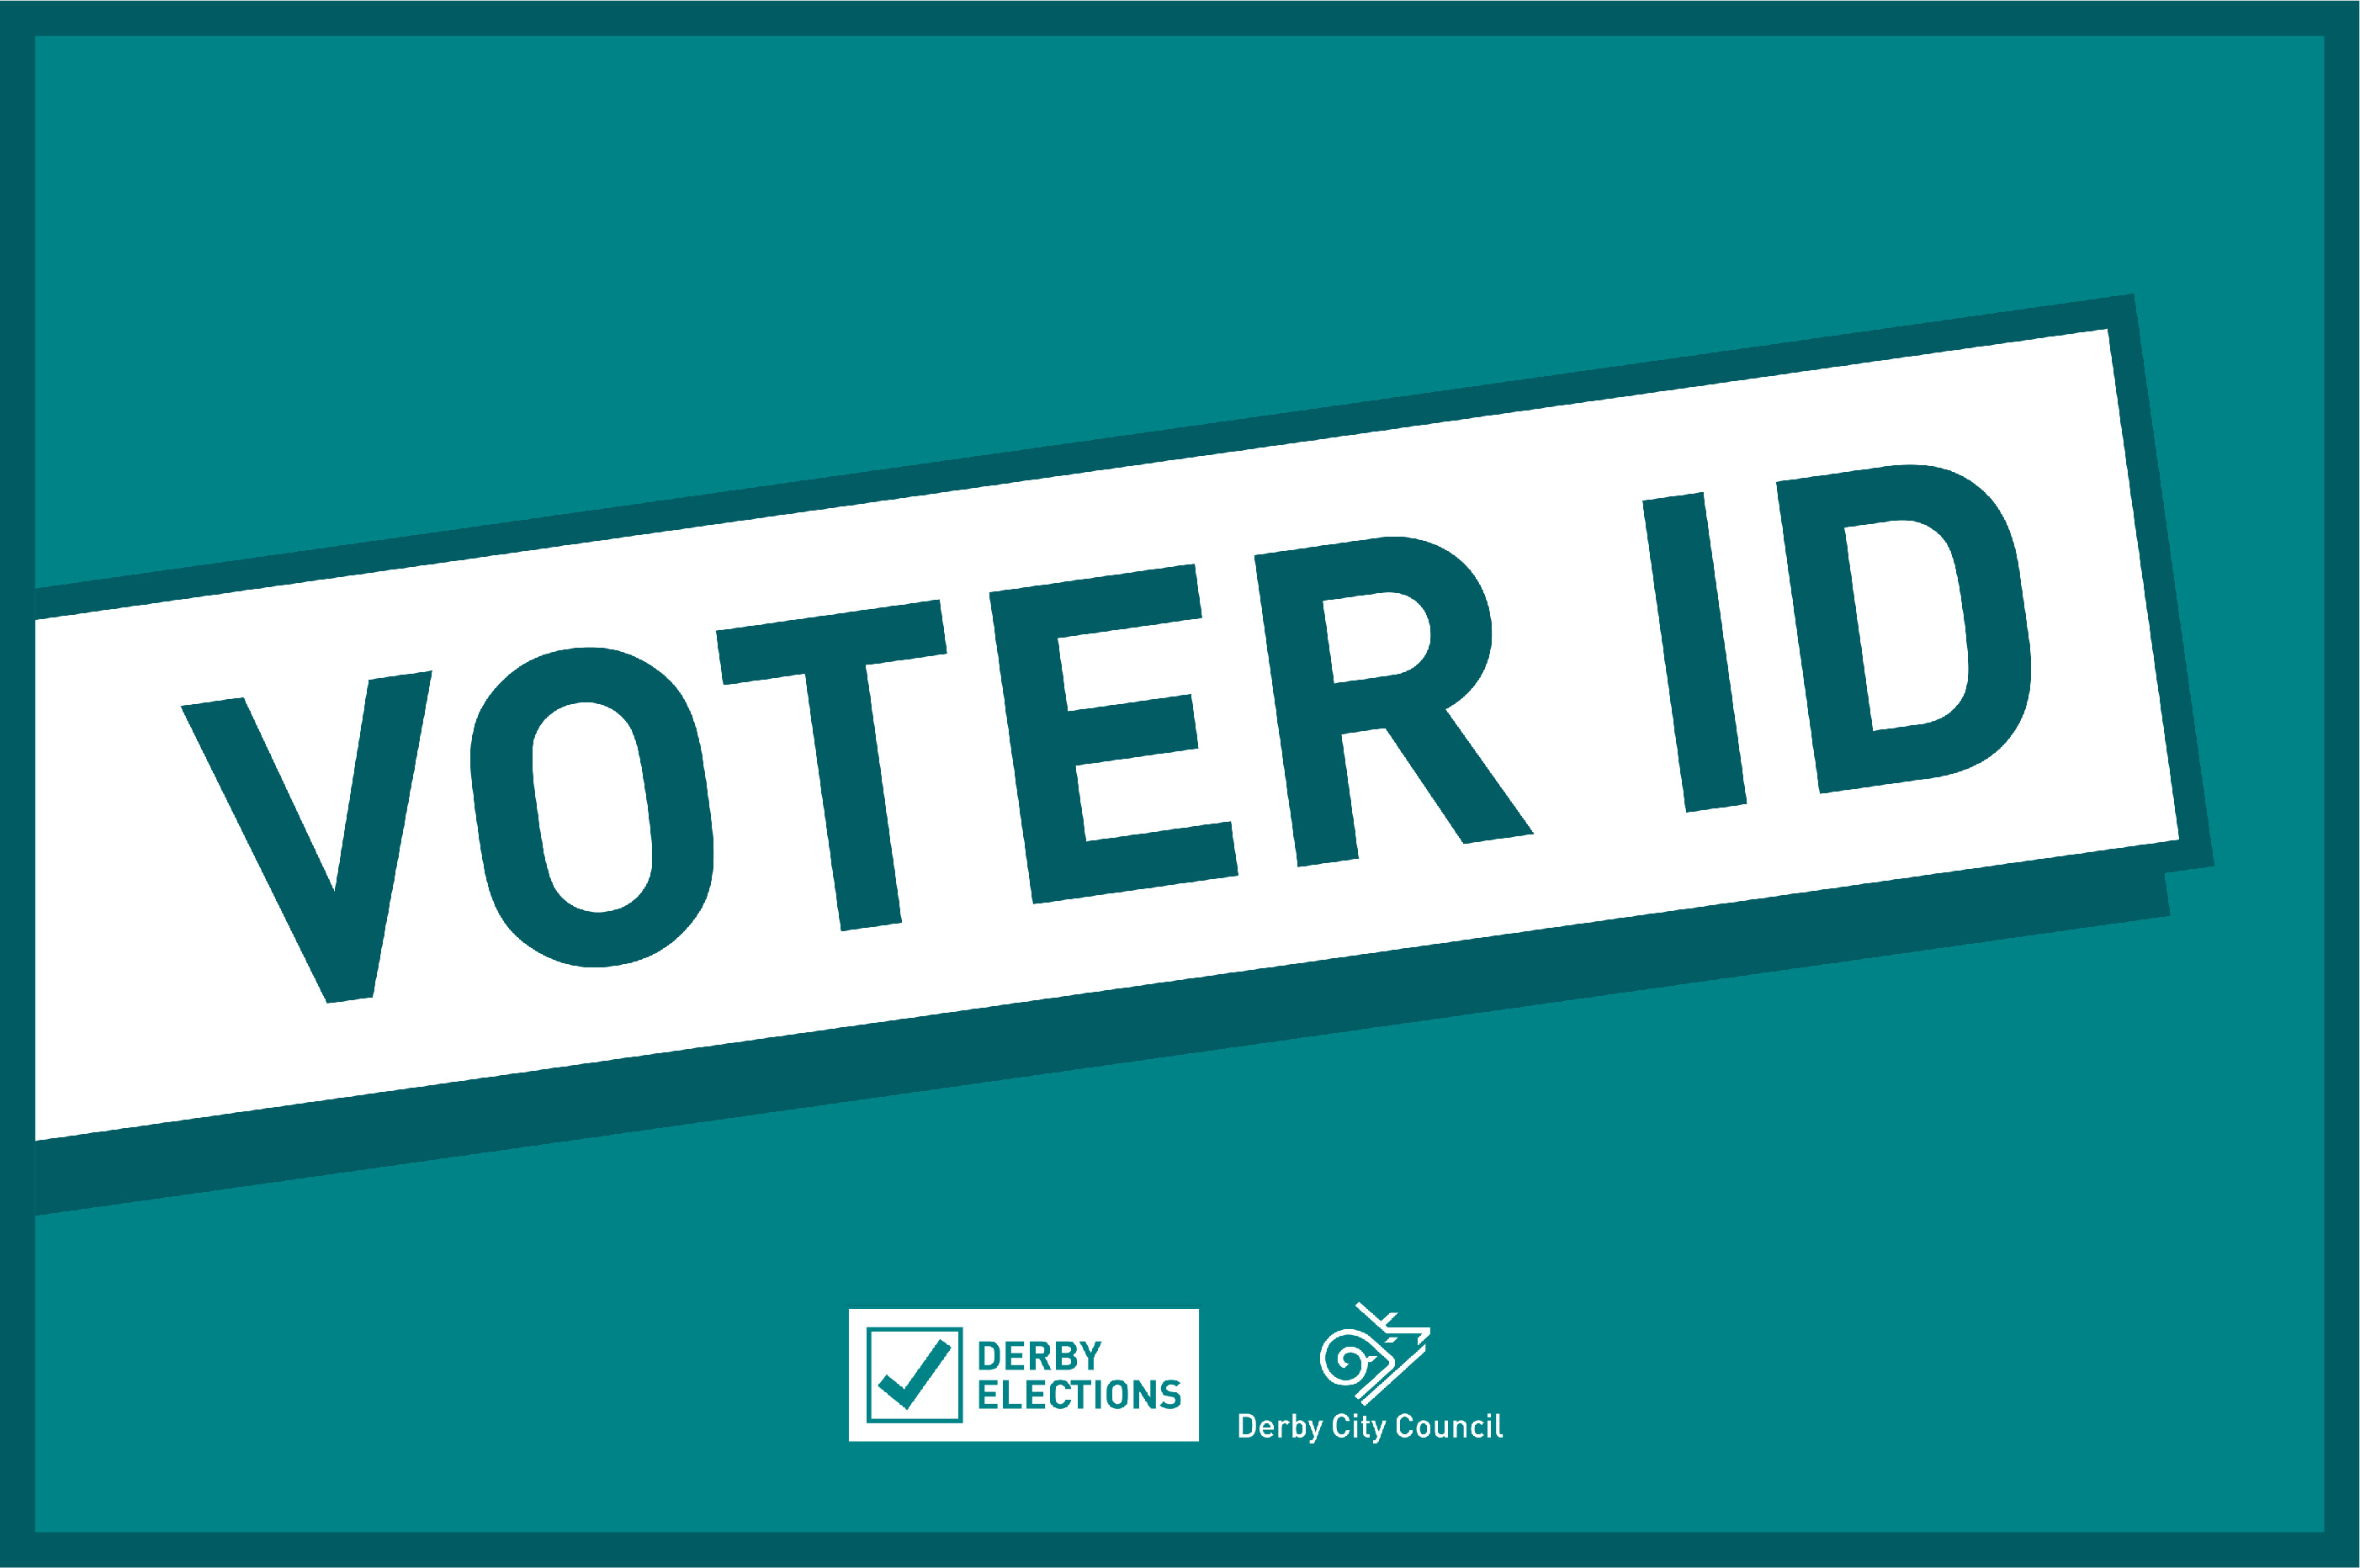 Voter ID logo on teal background